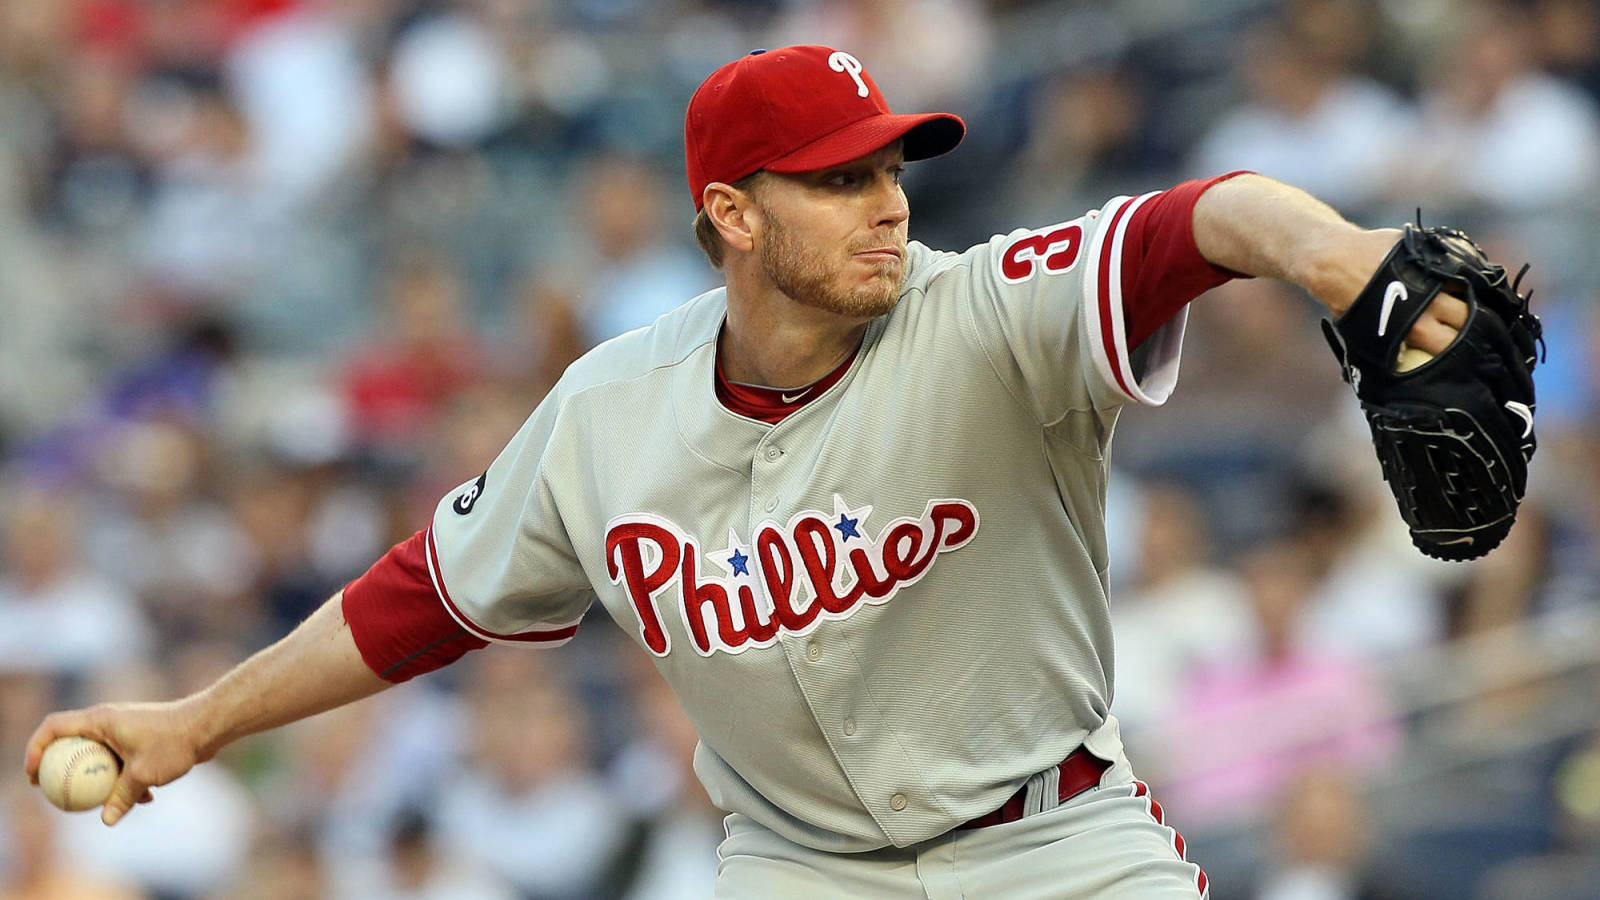 Documentary On Roy Halladay, Pitcher Killed In Icon A5 Crash, To Air On ESPN